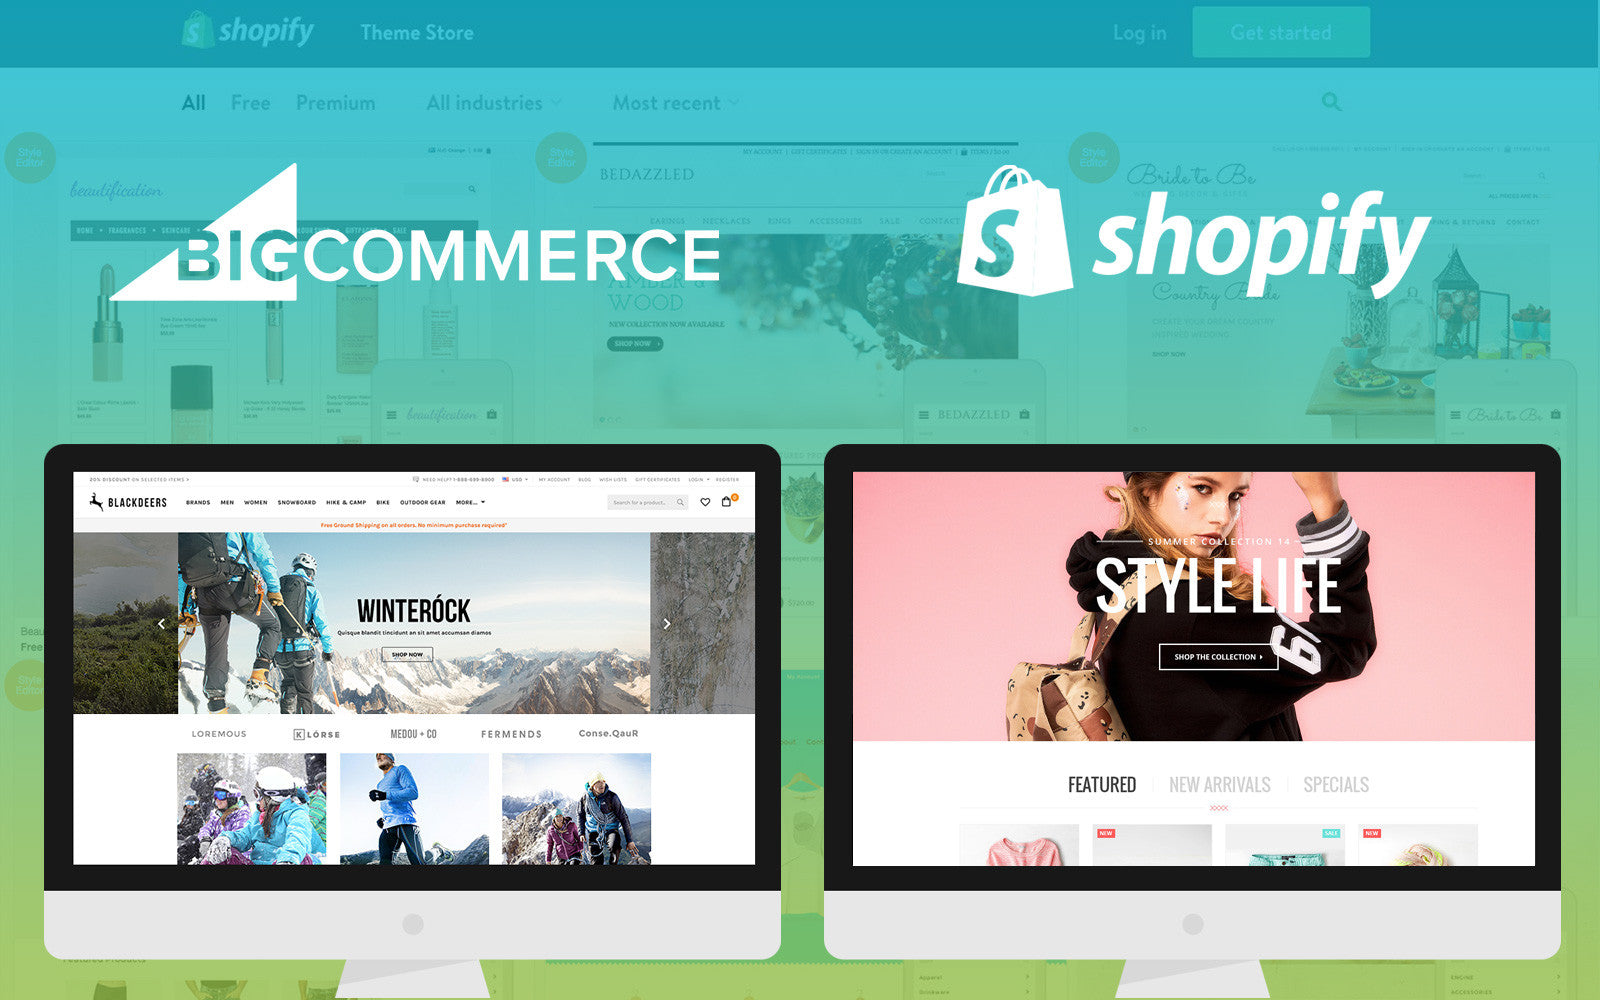 Comparing BigCommerce Templates With Shopify Themes